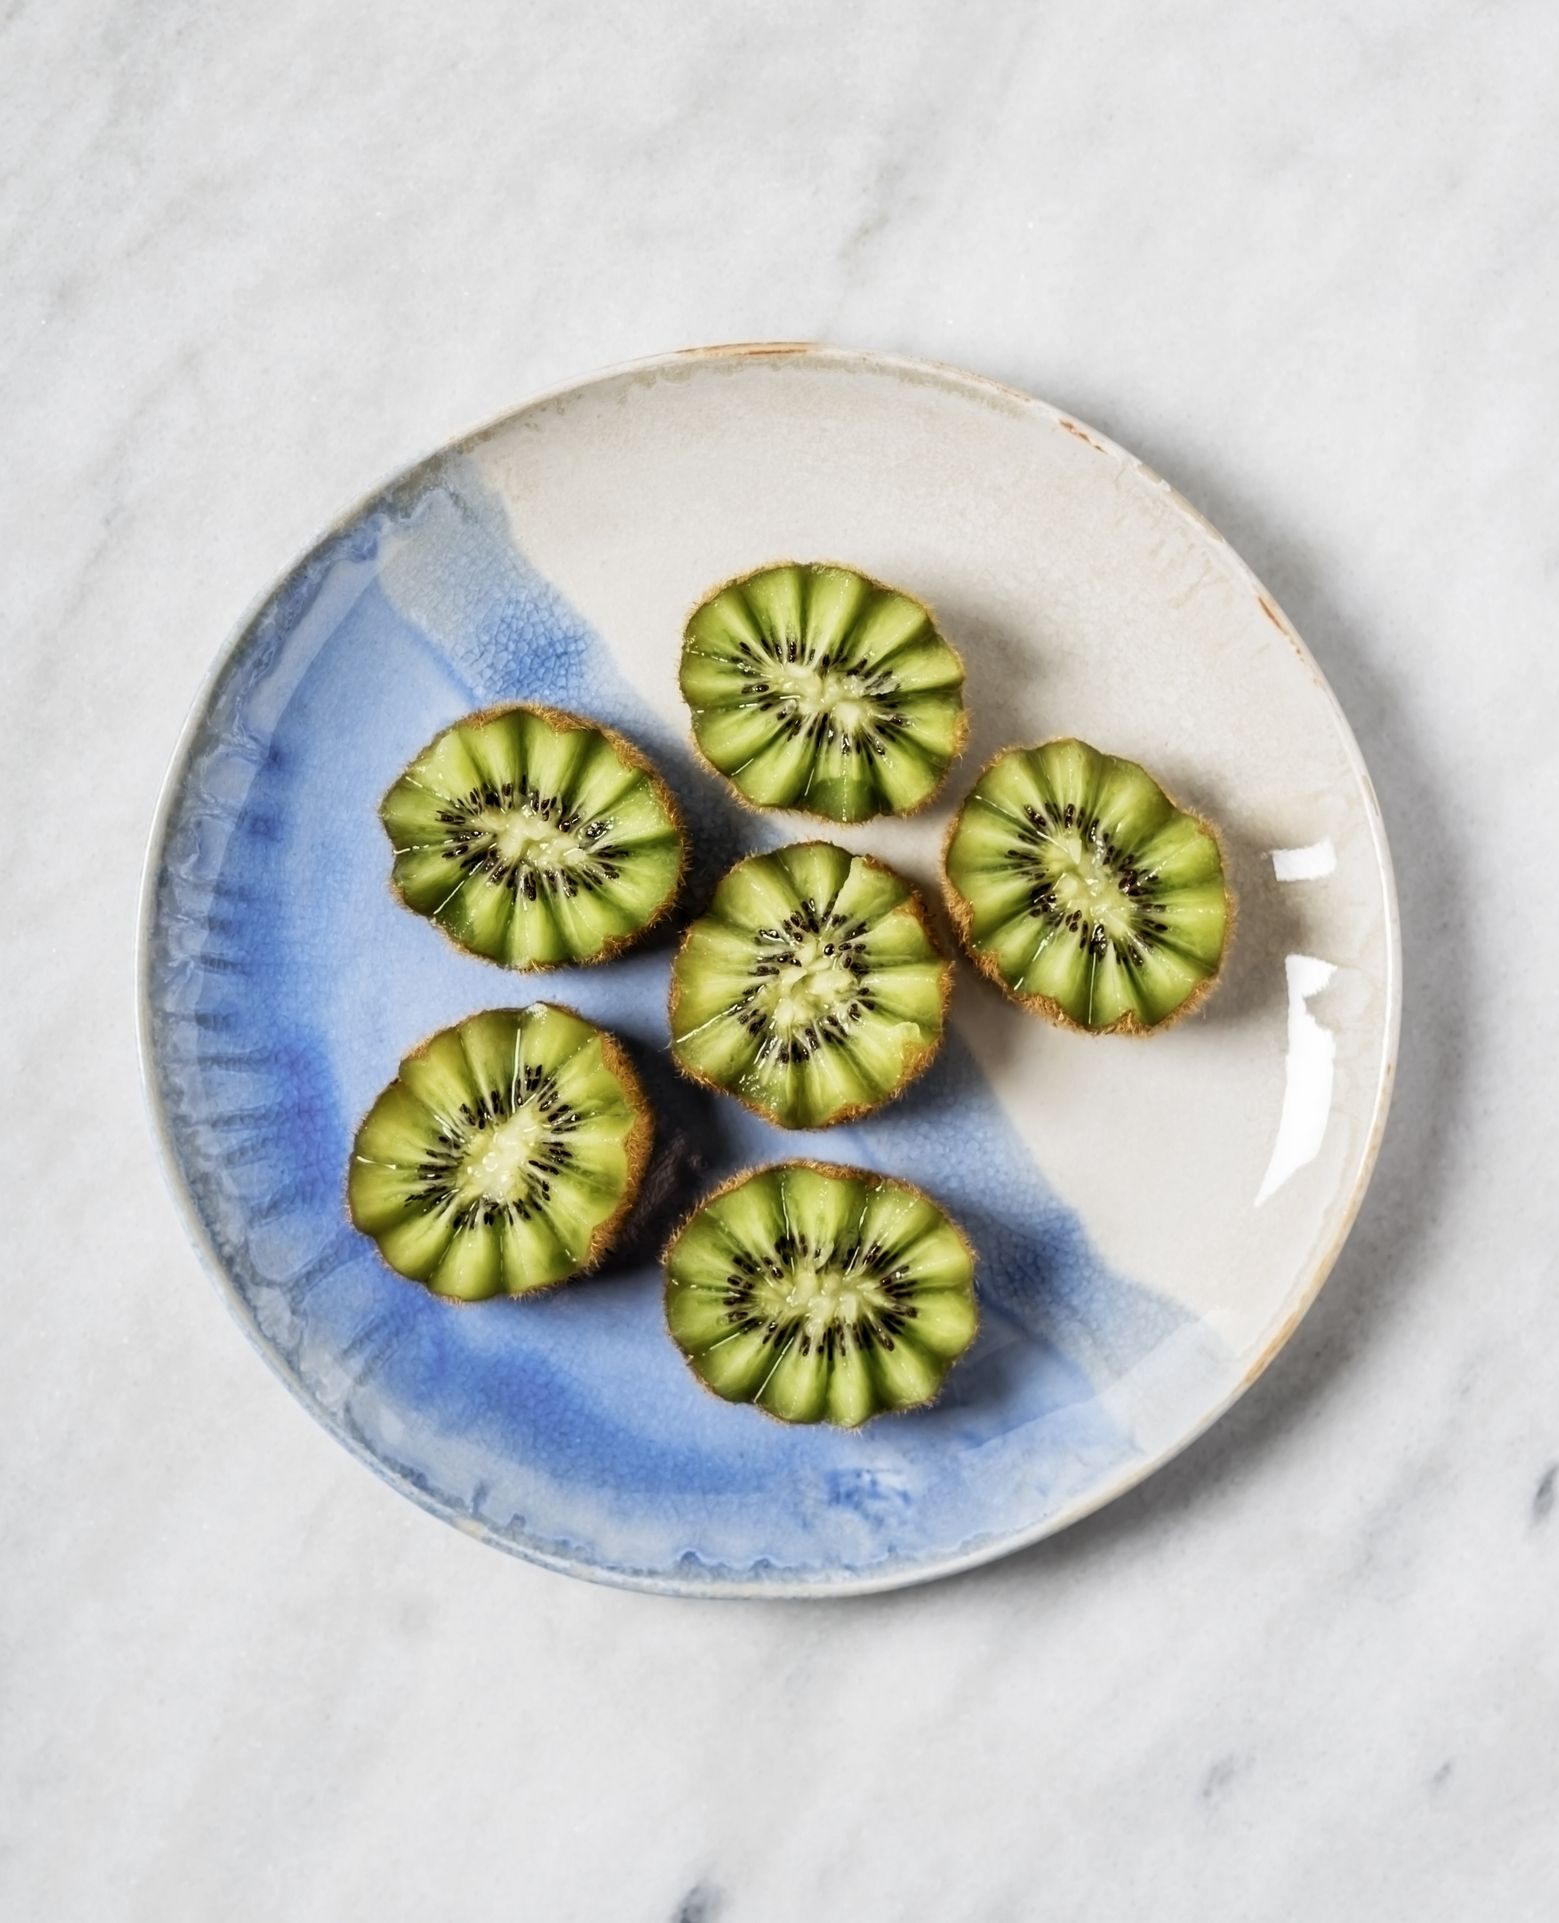 Slices of kiwi on a plate on white background